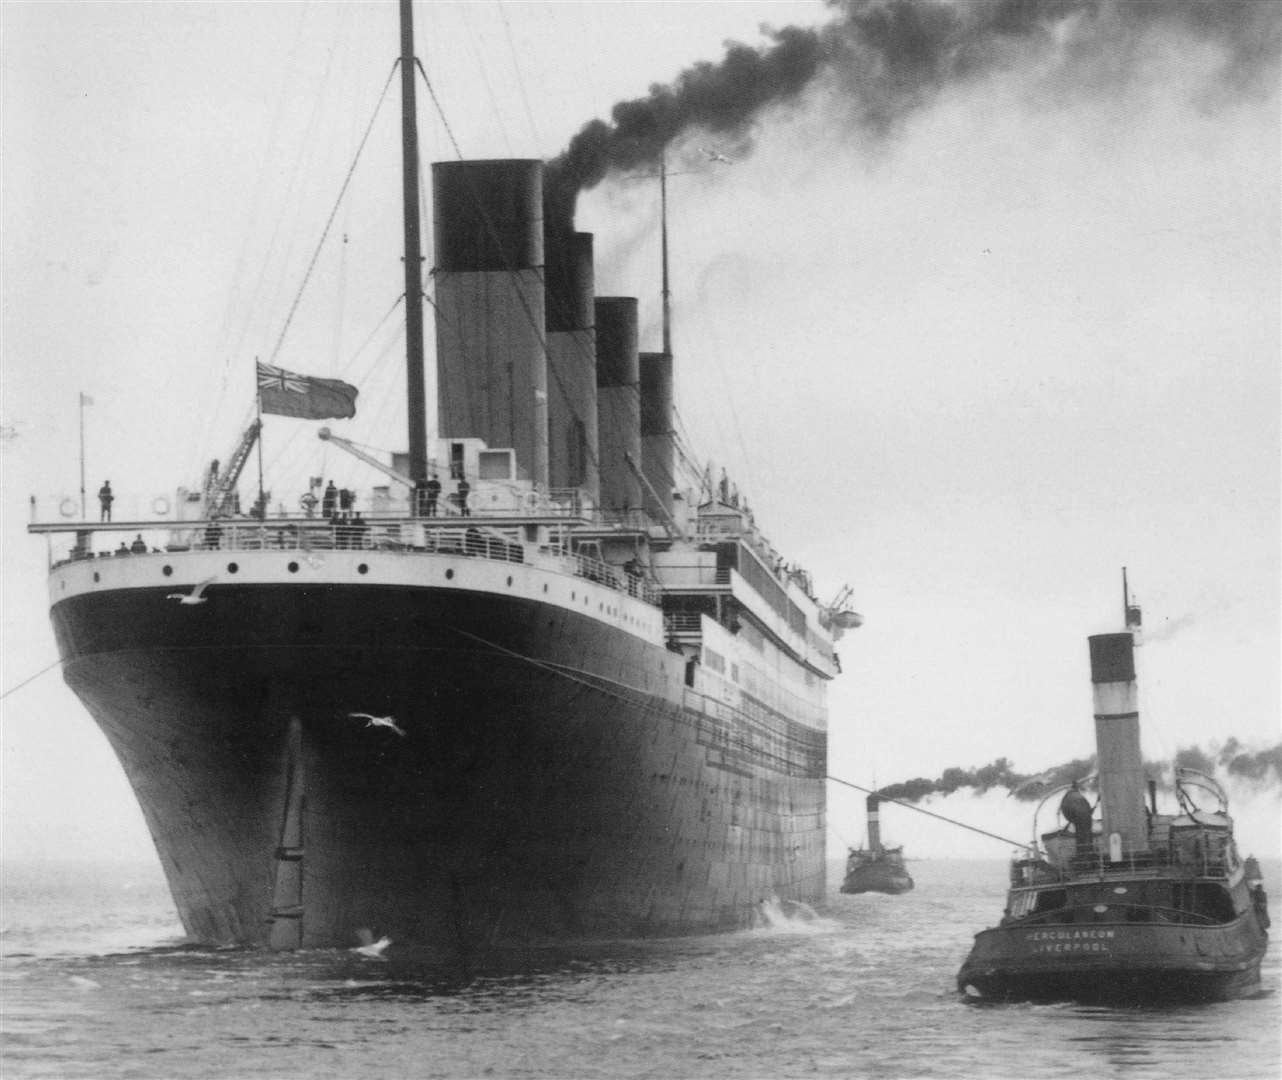 The Titanic before tragedy struck in 1912. Picture: Gail James